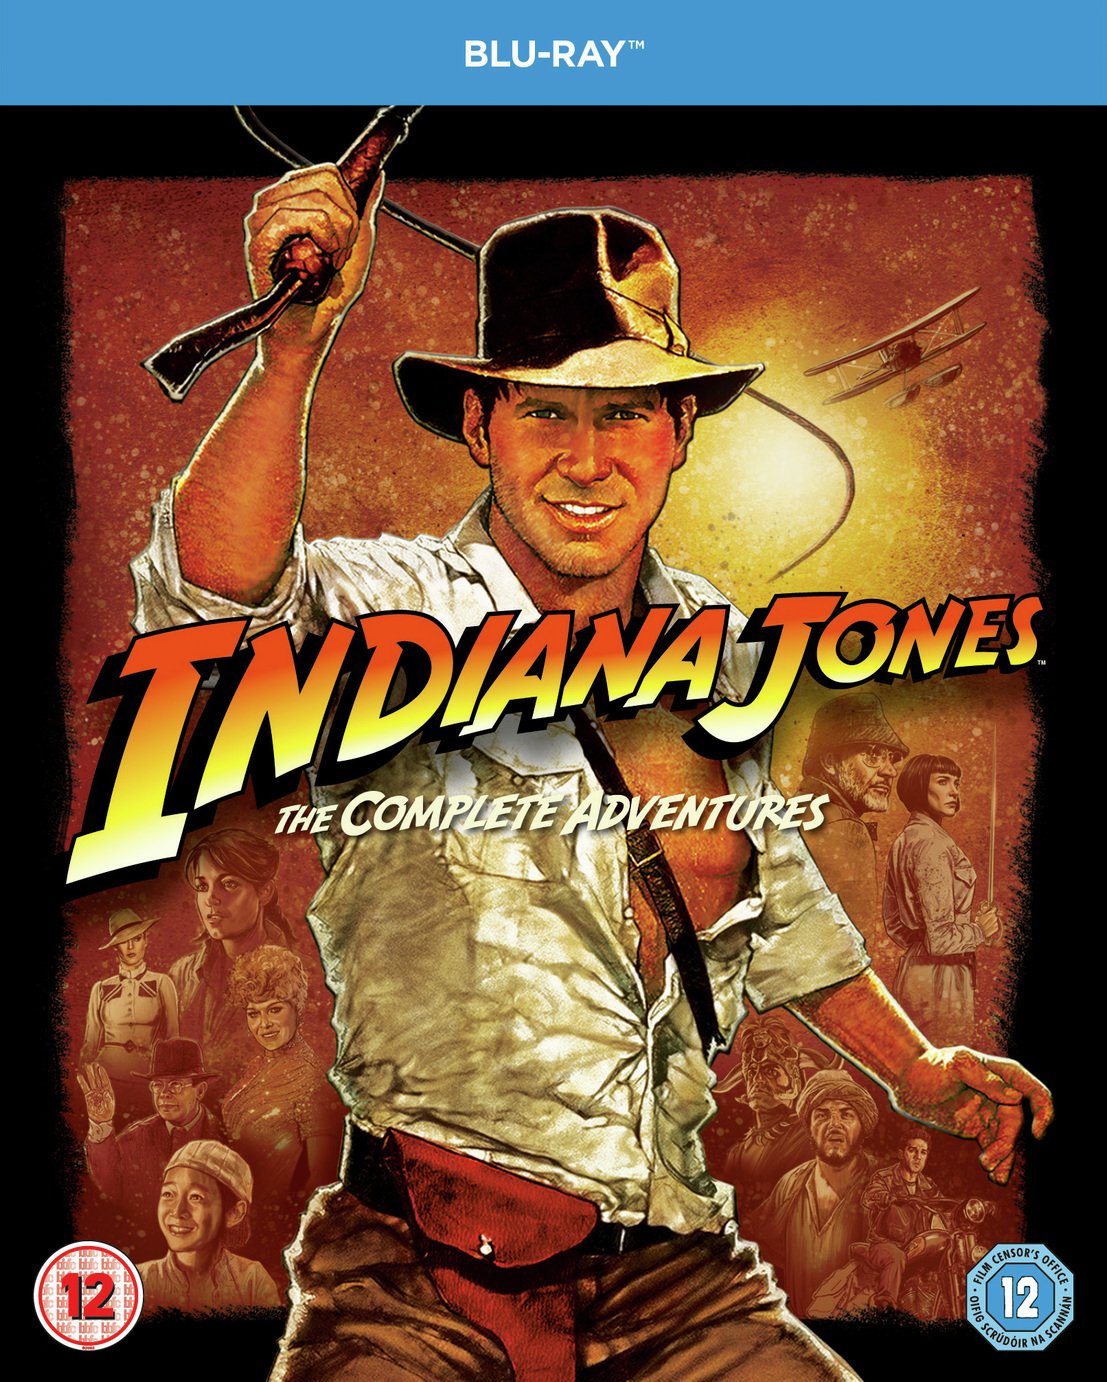 Indiana Jones: The Complete Adventures Blu-Ray Box Set Review